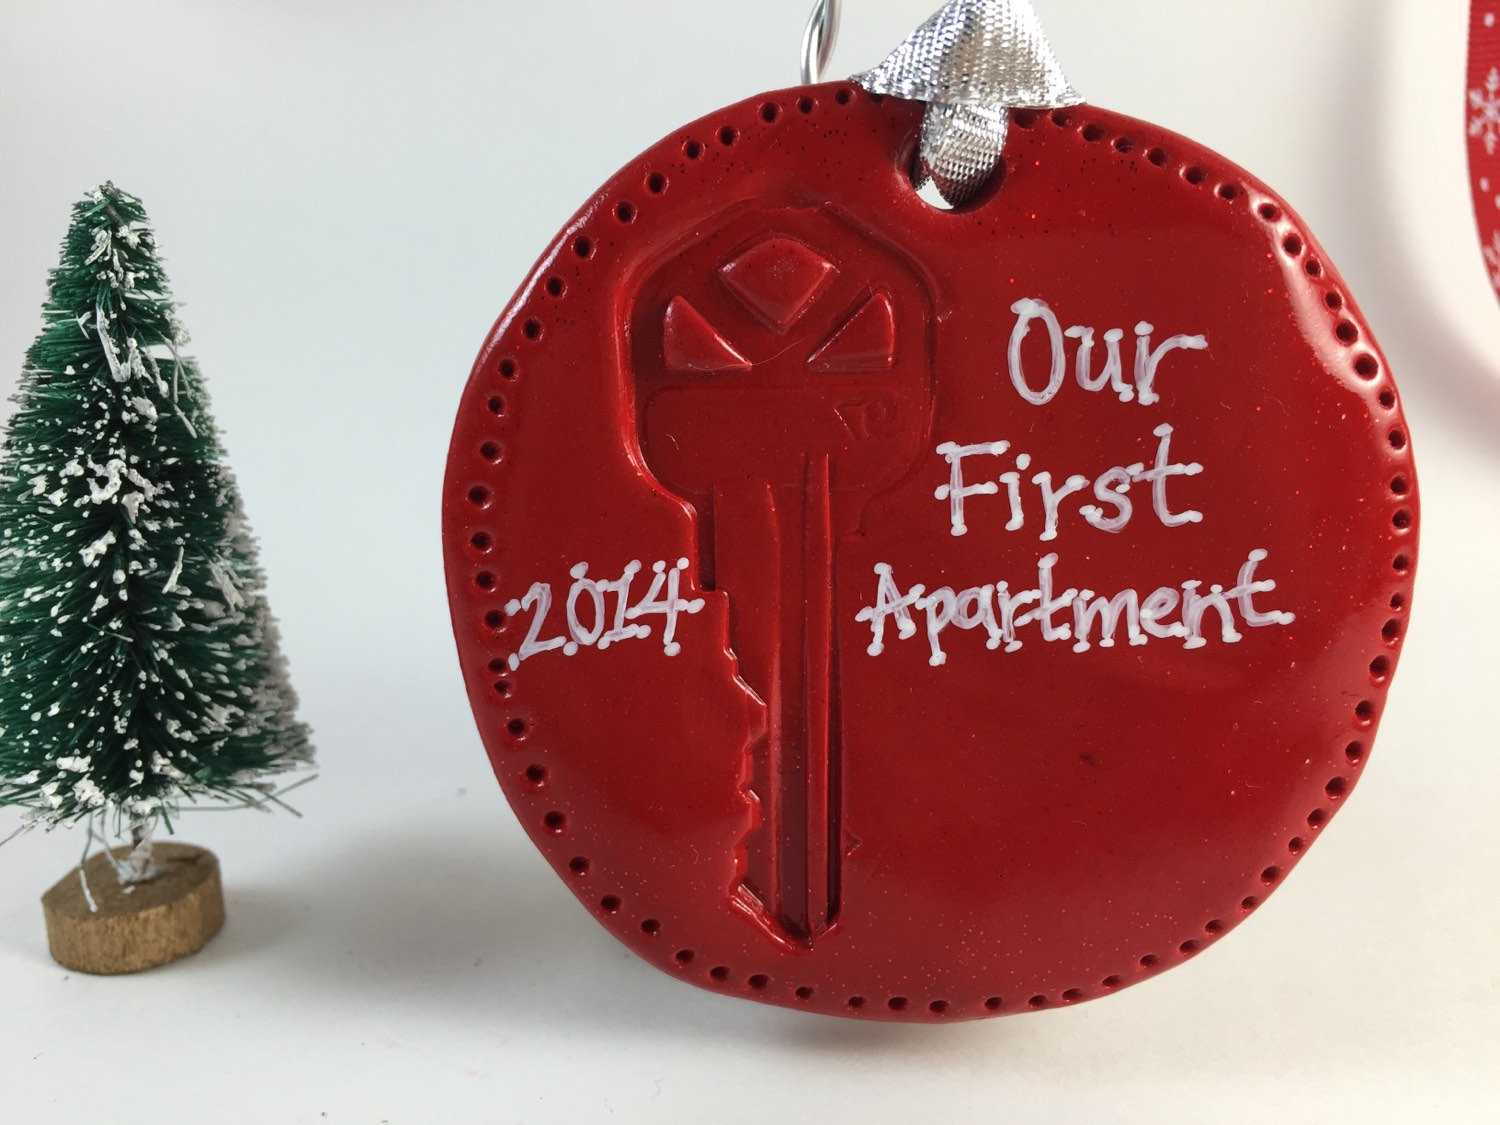 First Apartment Christmas Ornaments
 Our or My First Apartment or Home Key Ornament